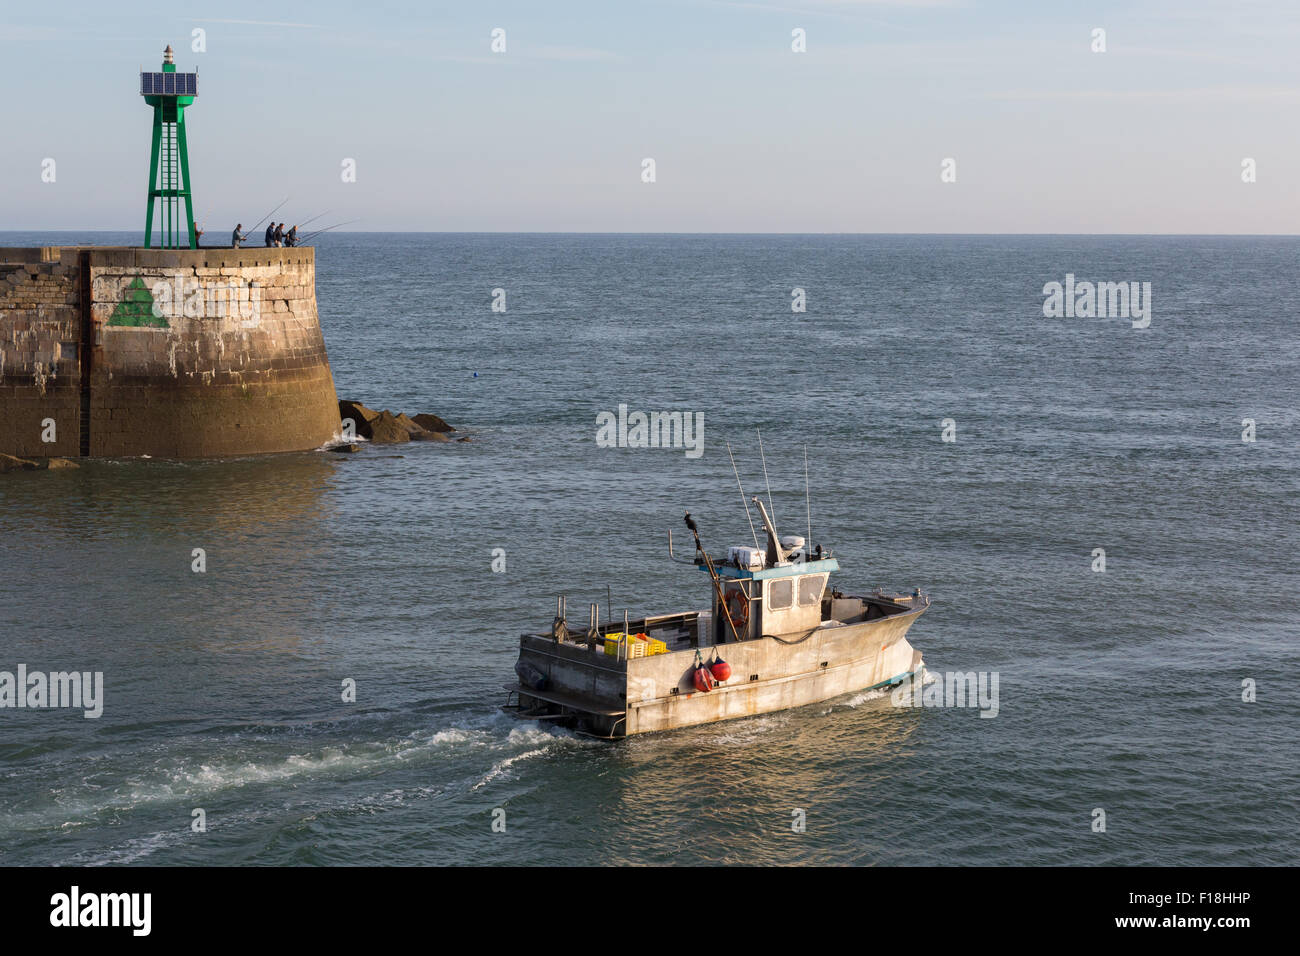 A fishing boat heads out to sea past anglers on the harbour wall at Port-en-Bessin, Normandy, France Stock Photo